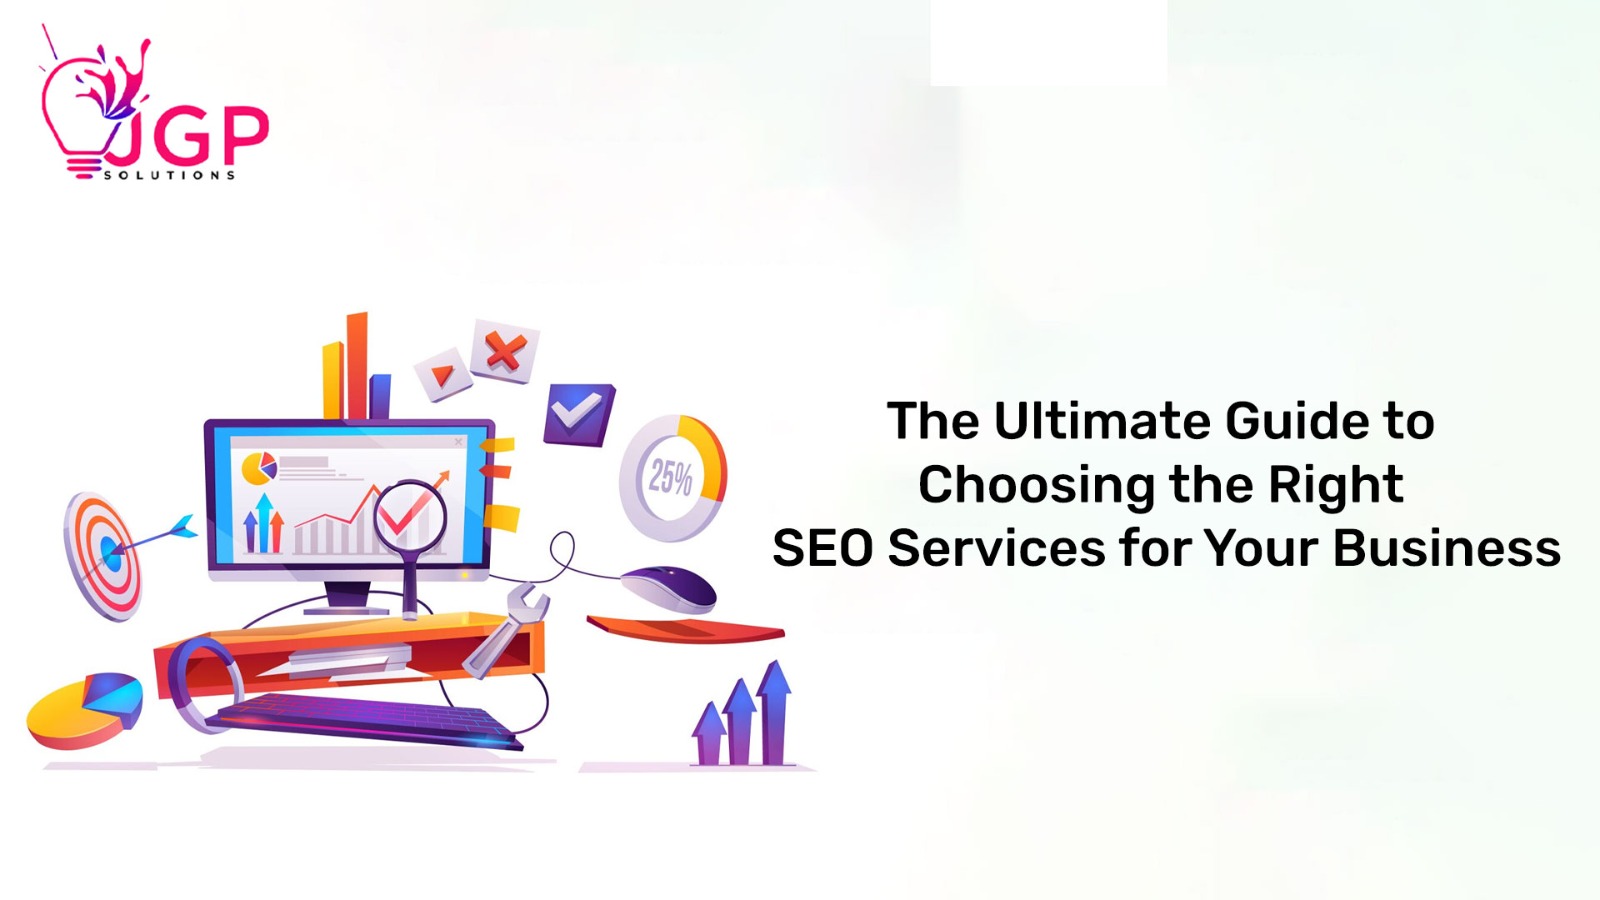 "The Ultimate Guide to Choosing the Right SEO Services for Your Business"